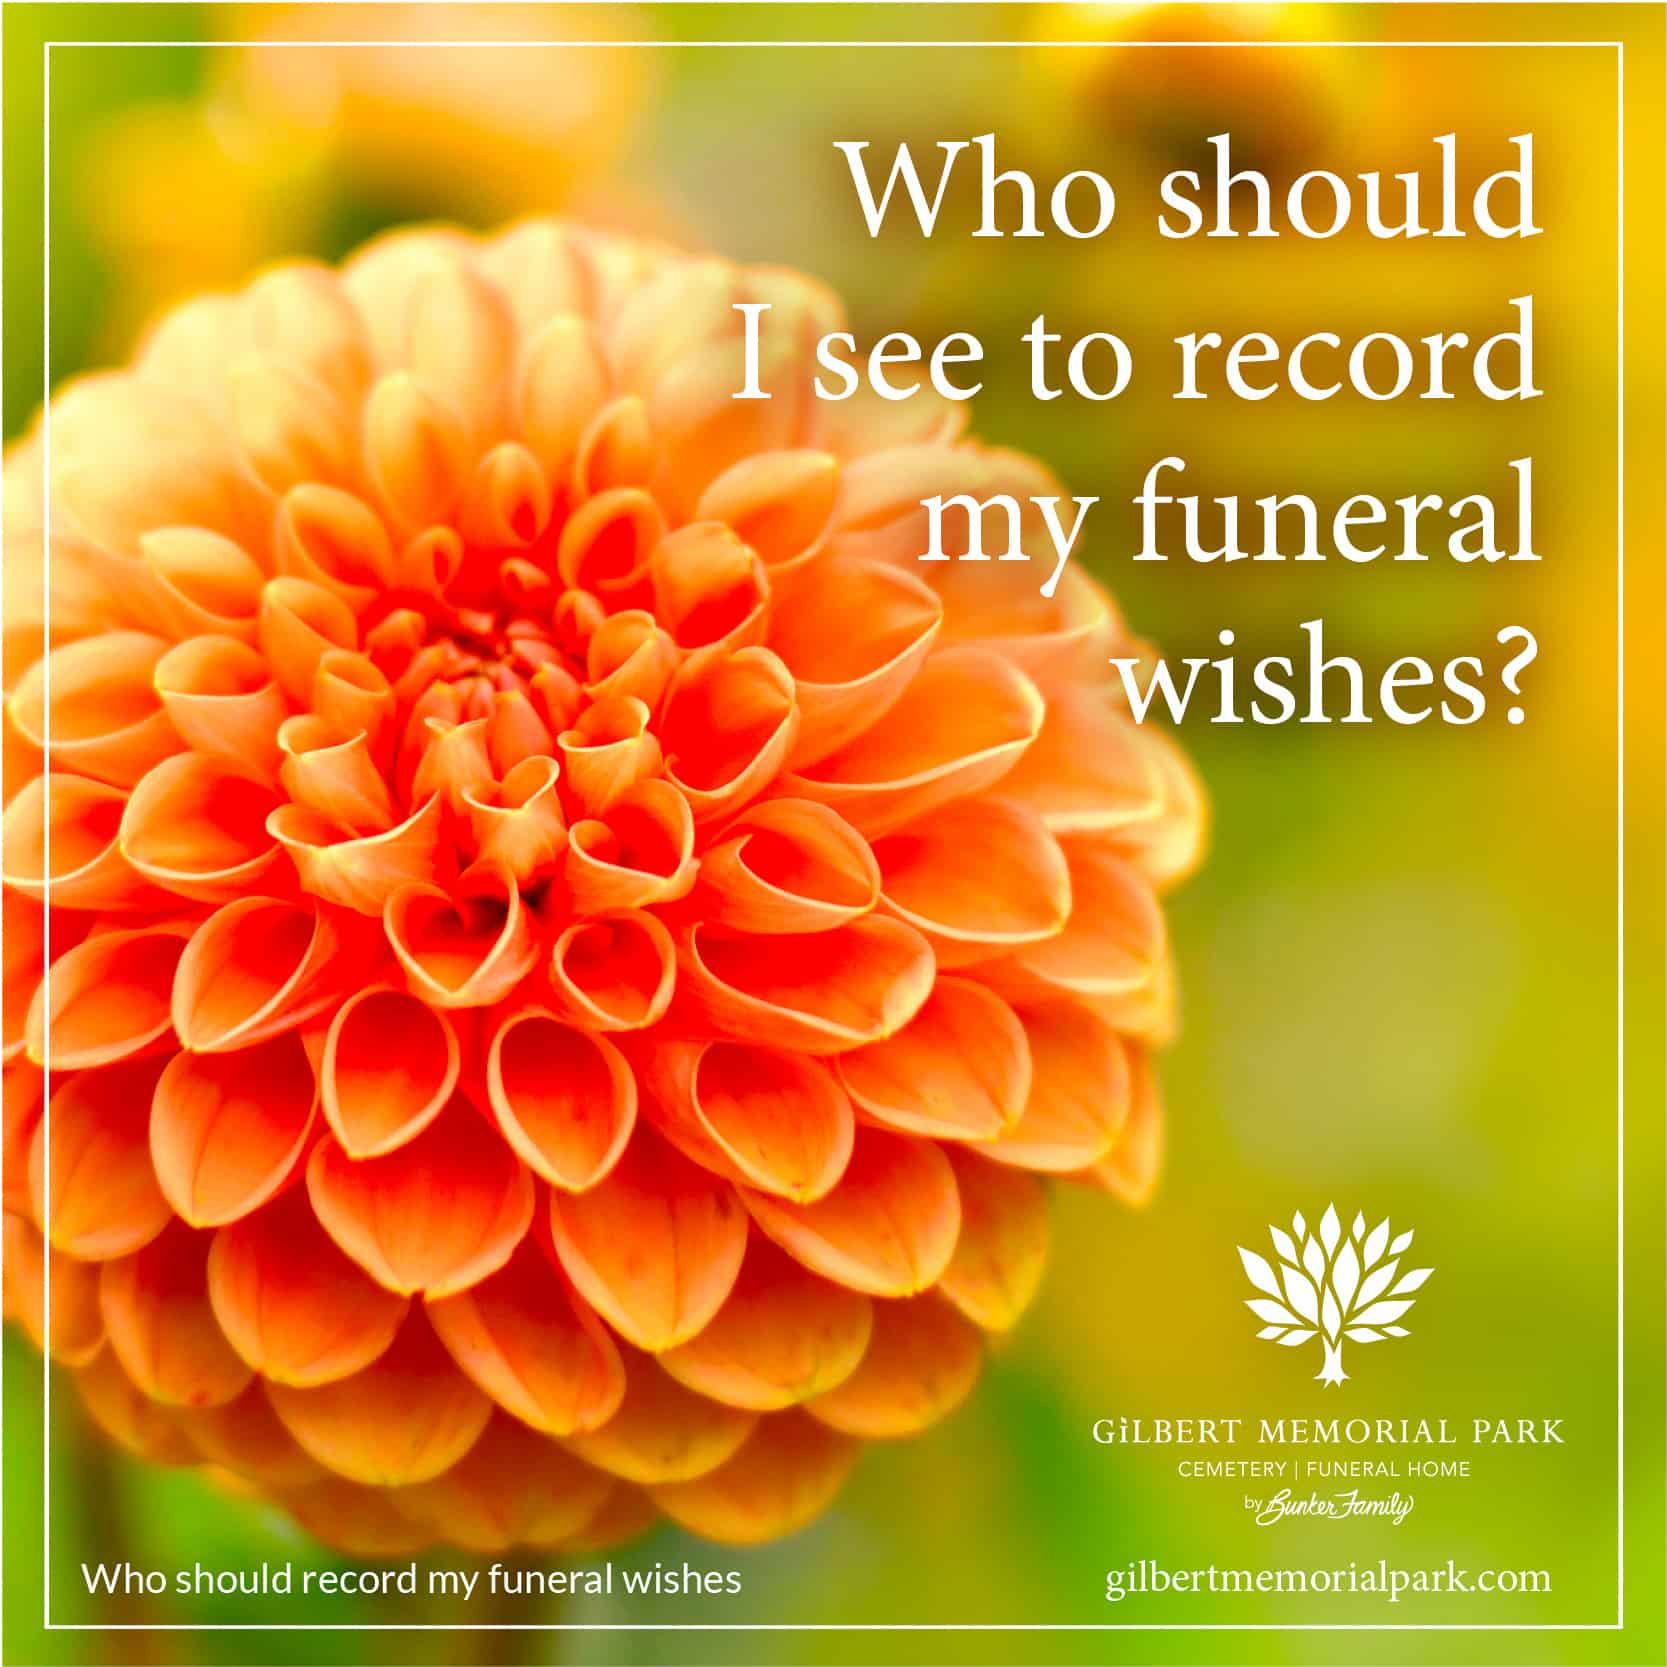 Who Should Record my Funeral Wishes?